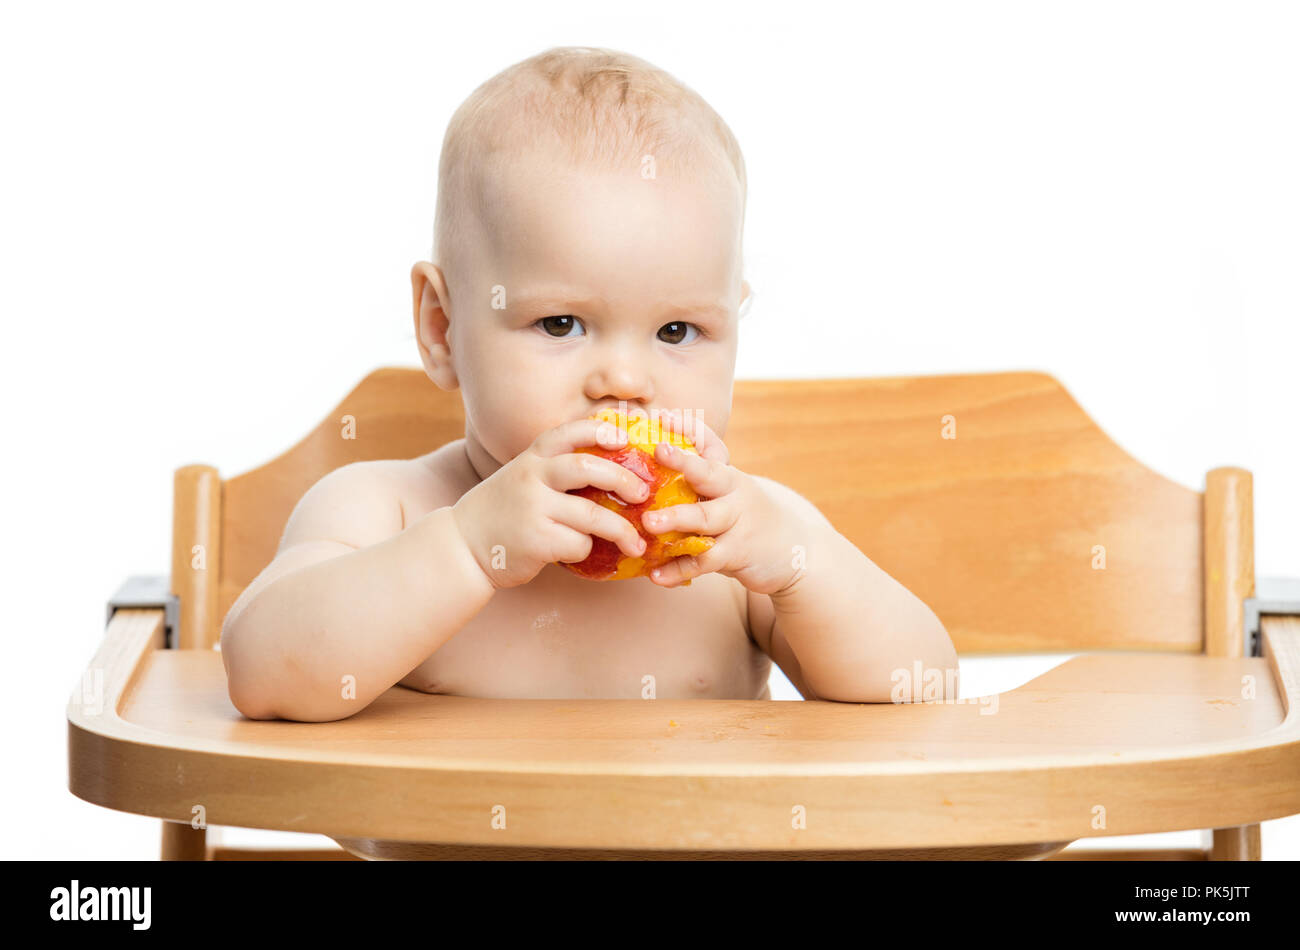 Cute baby girl eating peach while sitting in high chair over white background Stock Photo